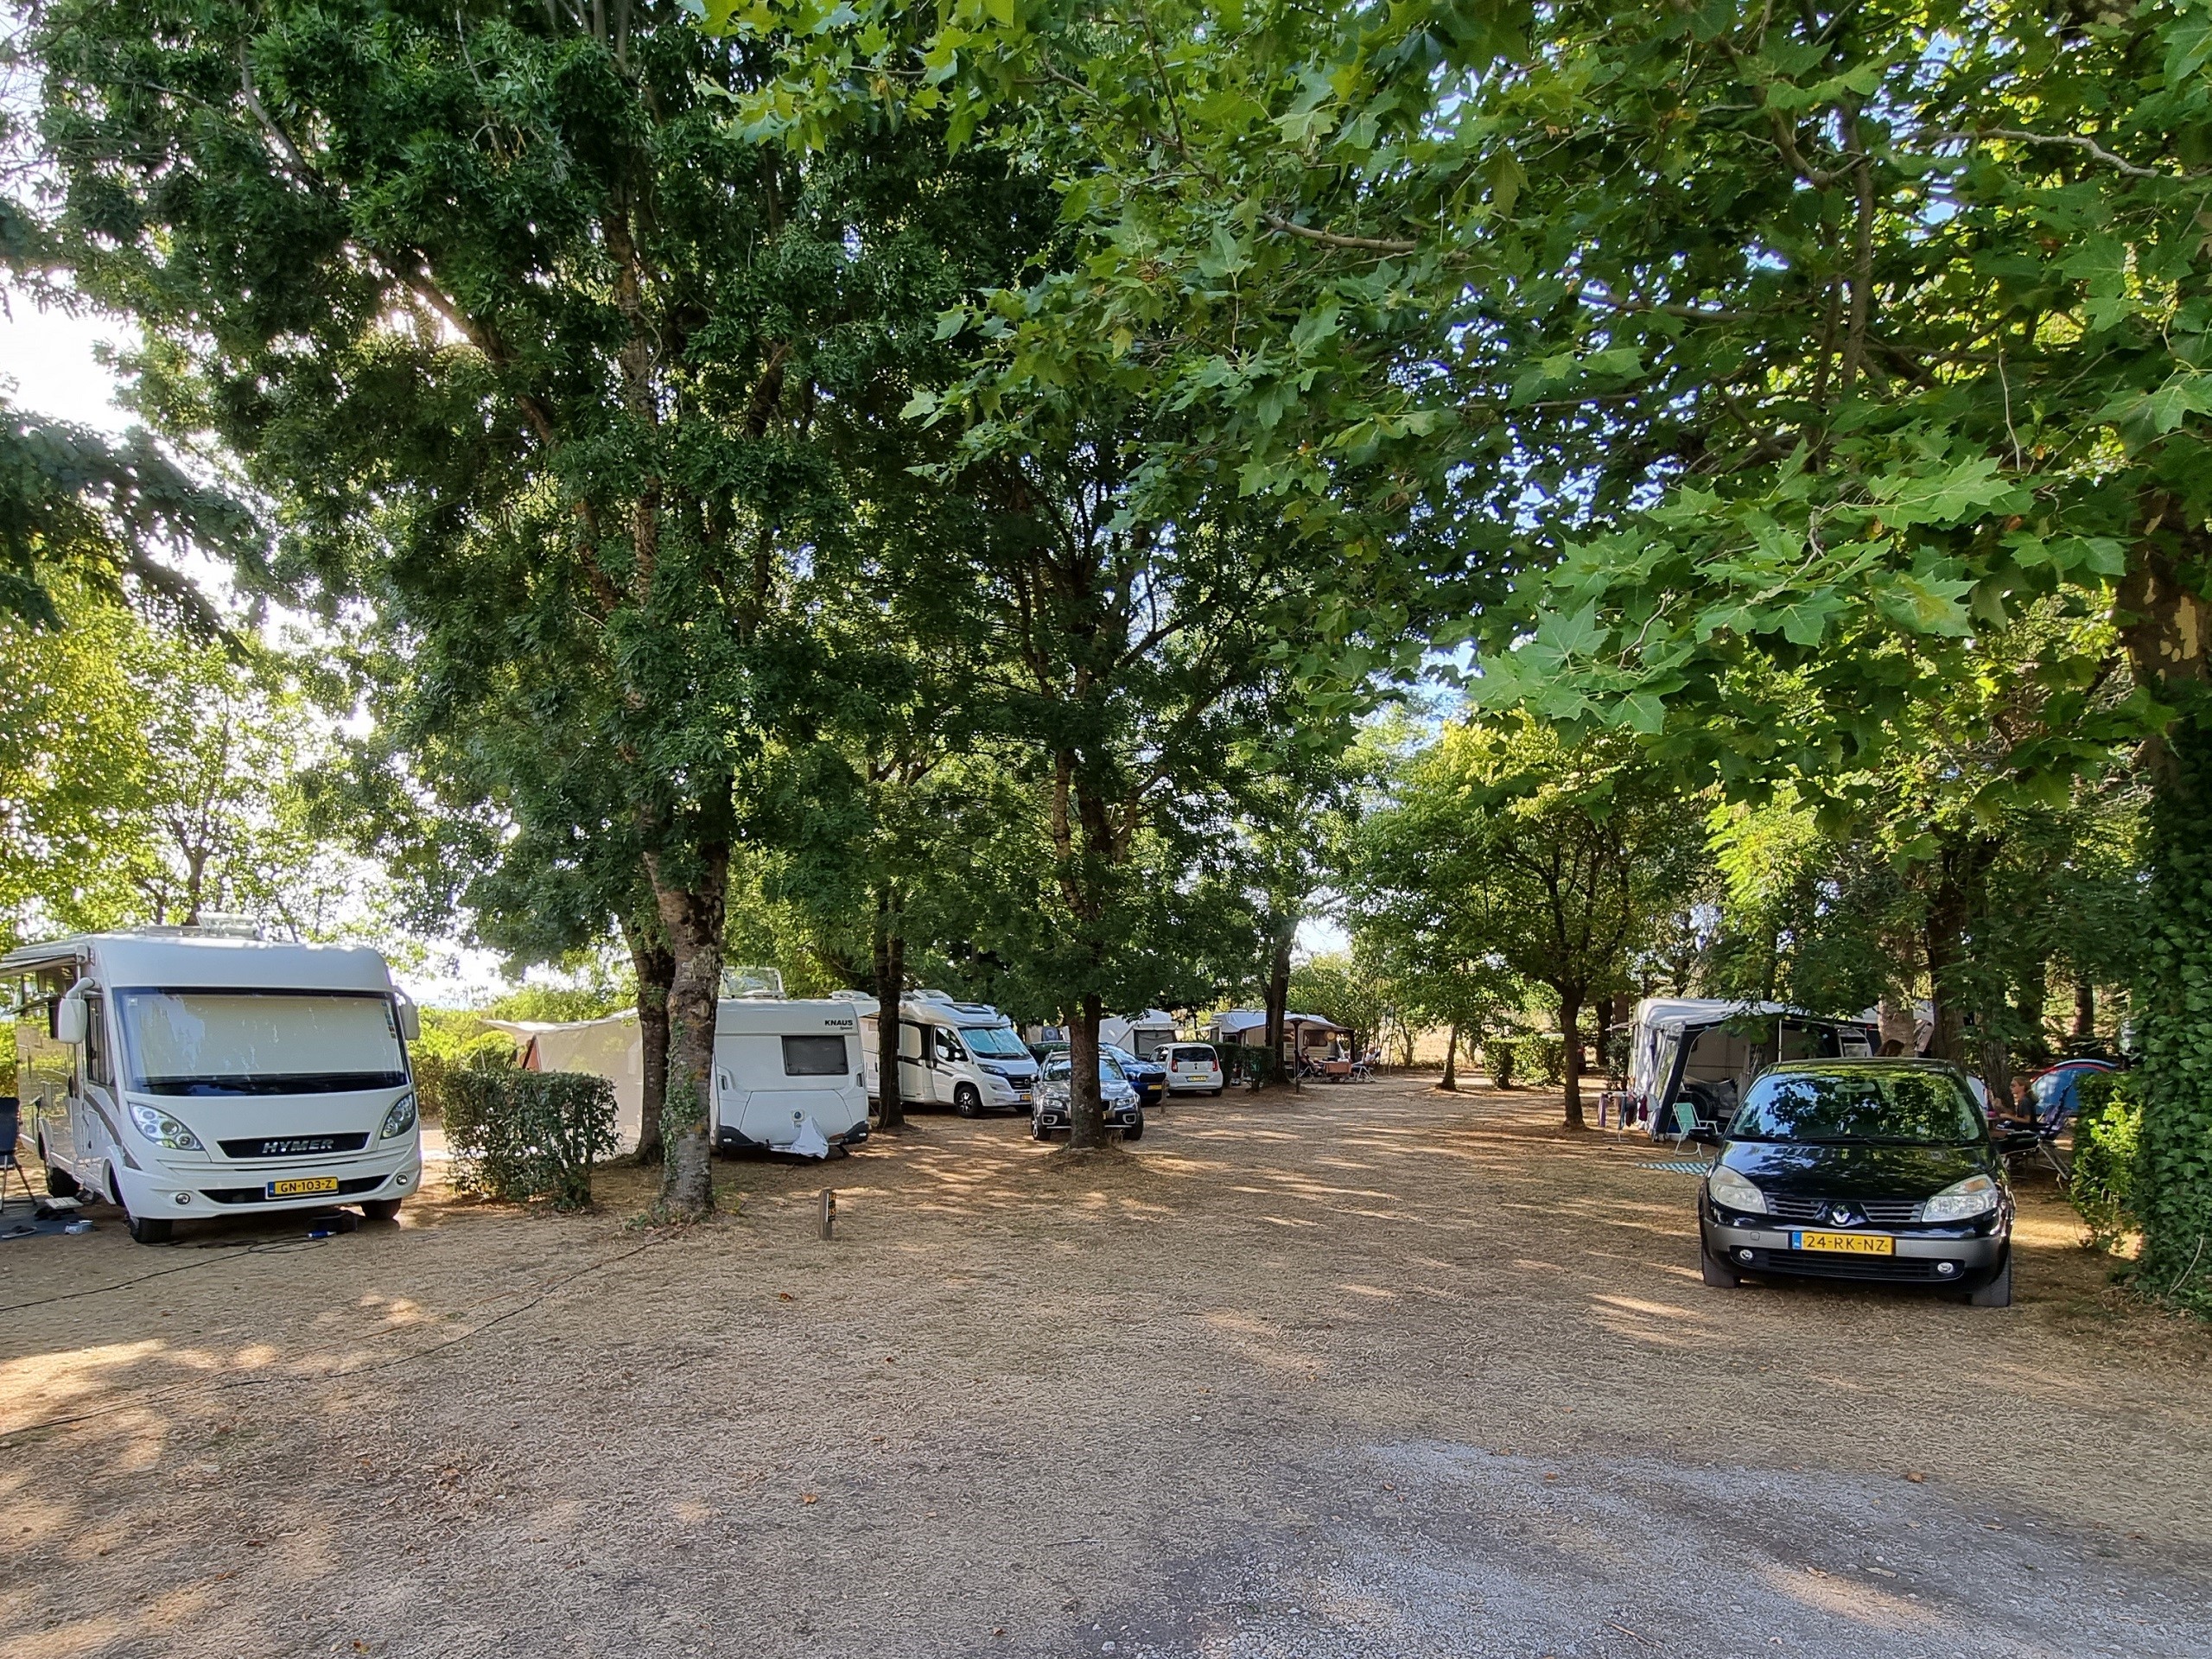 Privilege Pitch 120 M2, 10A Electricity, Motorhome Or Car + Tent/Caravan +2 Pers